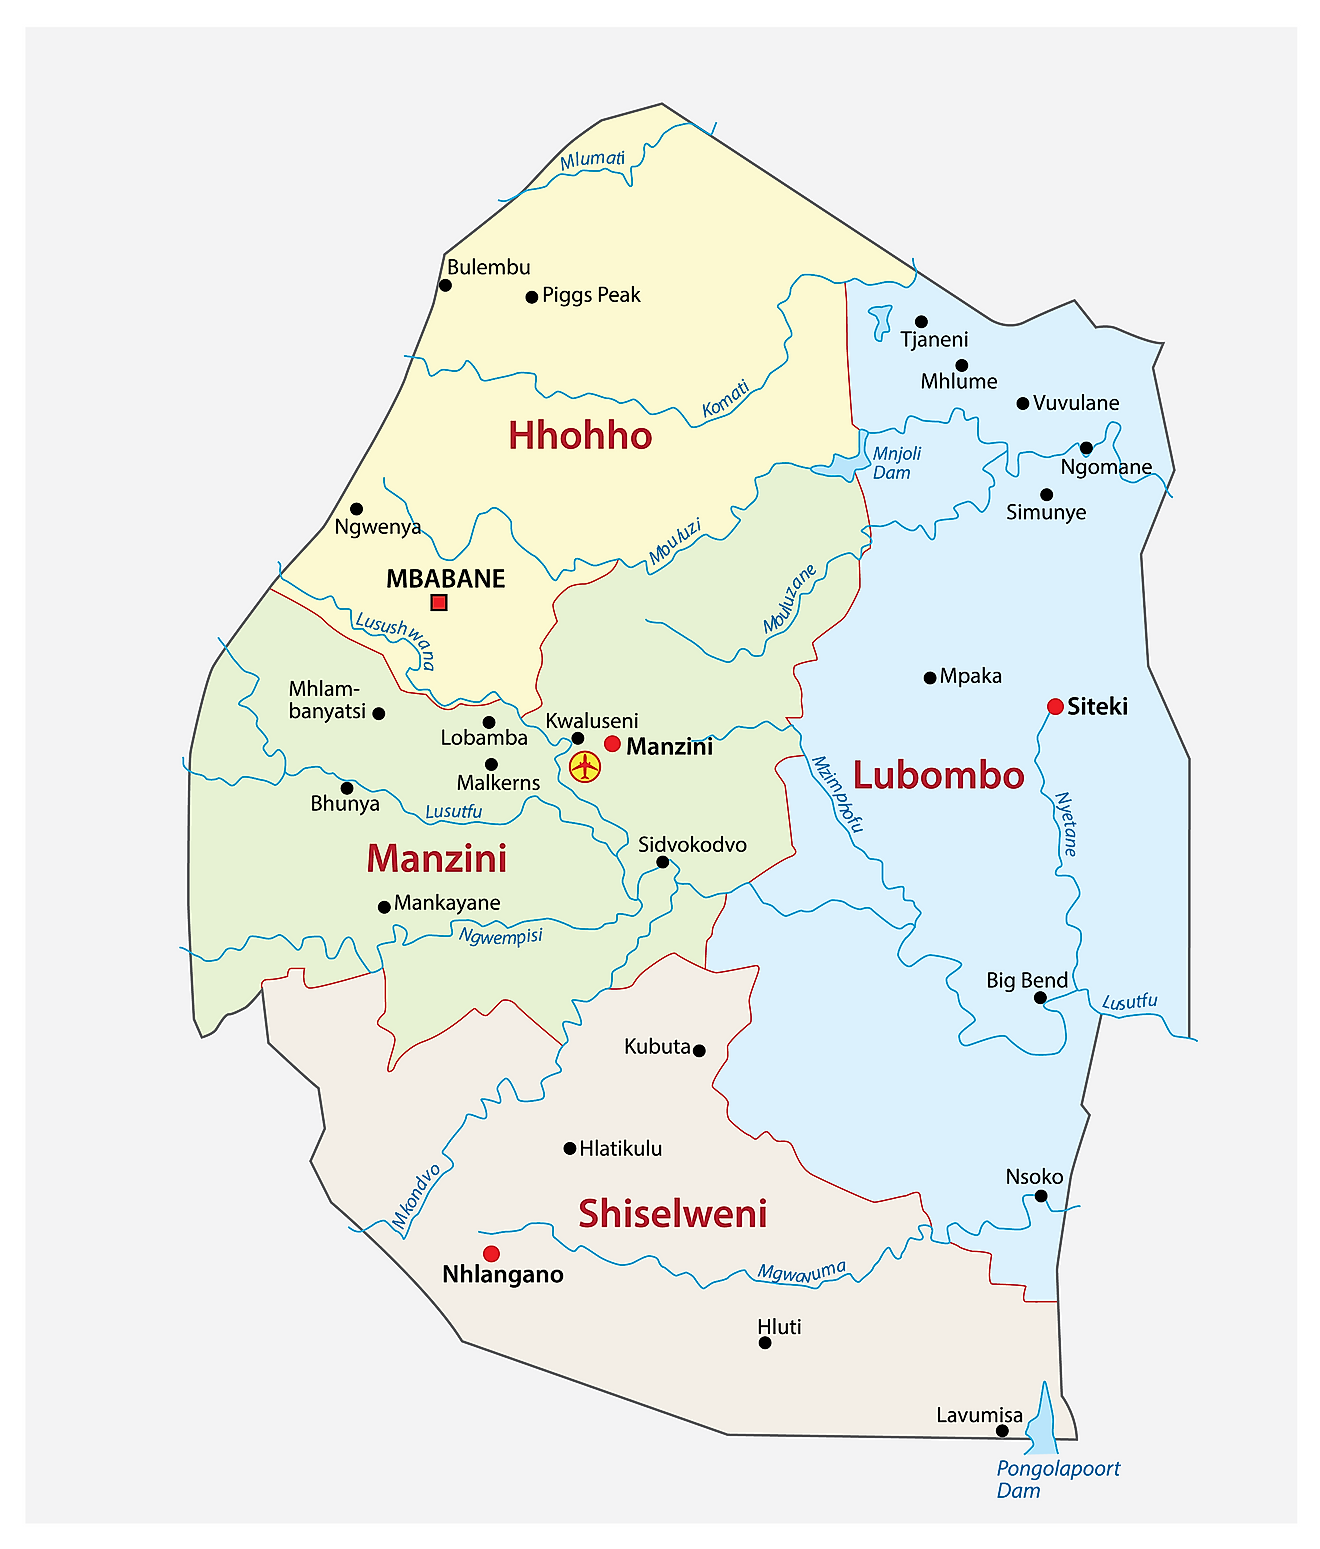 Administrative Map of Eswatini showing the four regions of the country, their capitals, and the national capital of Mbabane.